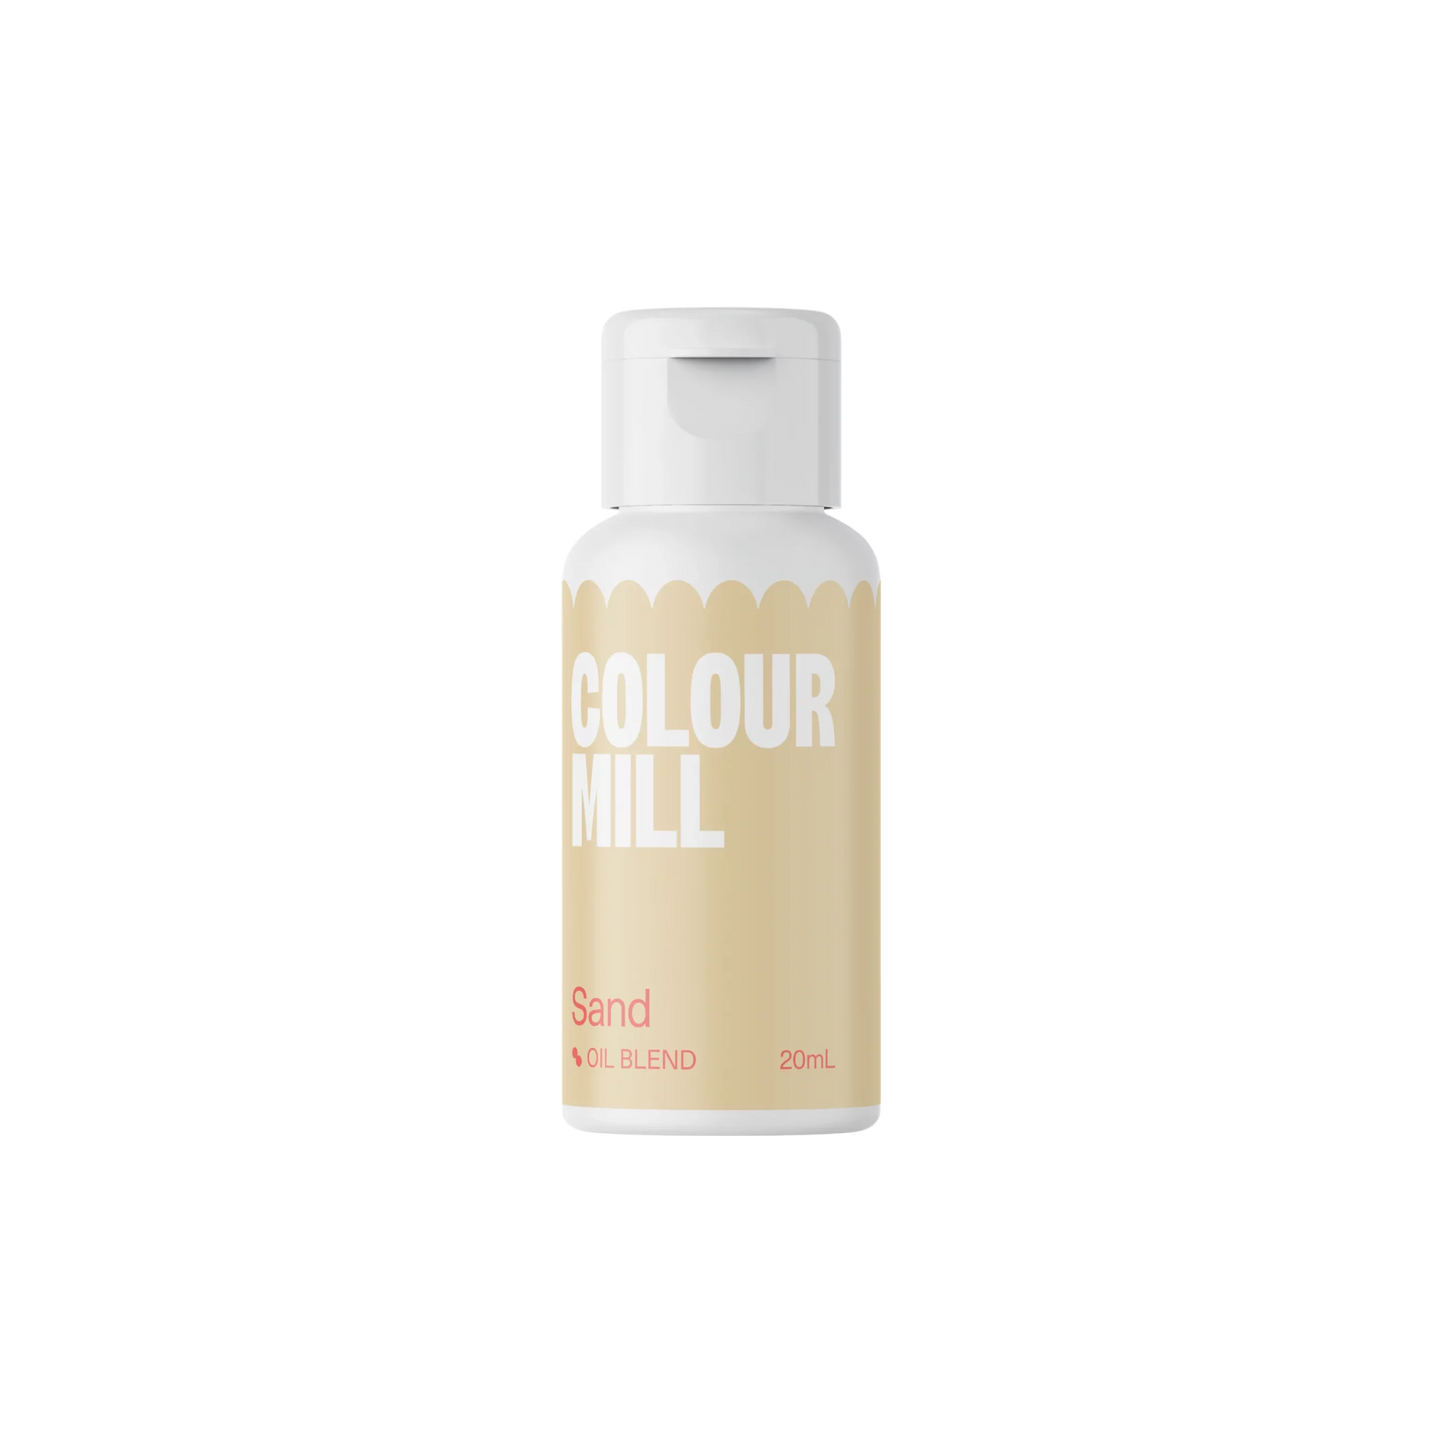 COLOUR MILL - Oil Based Food Colouring 100ml